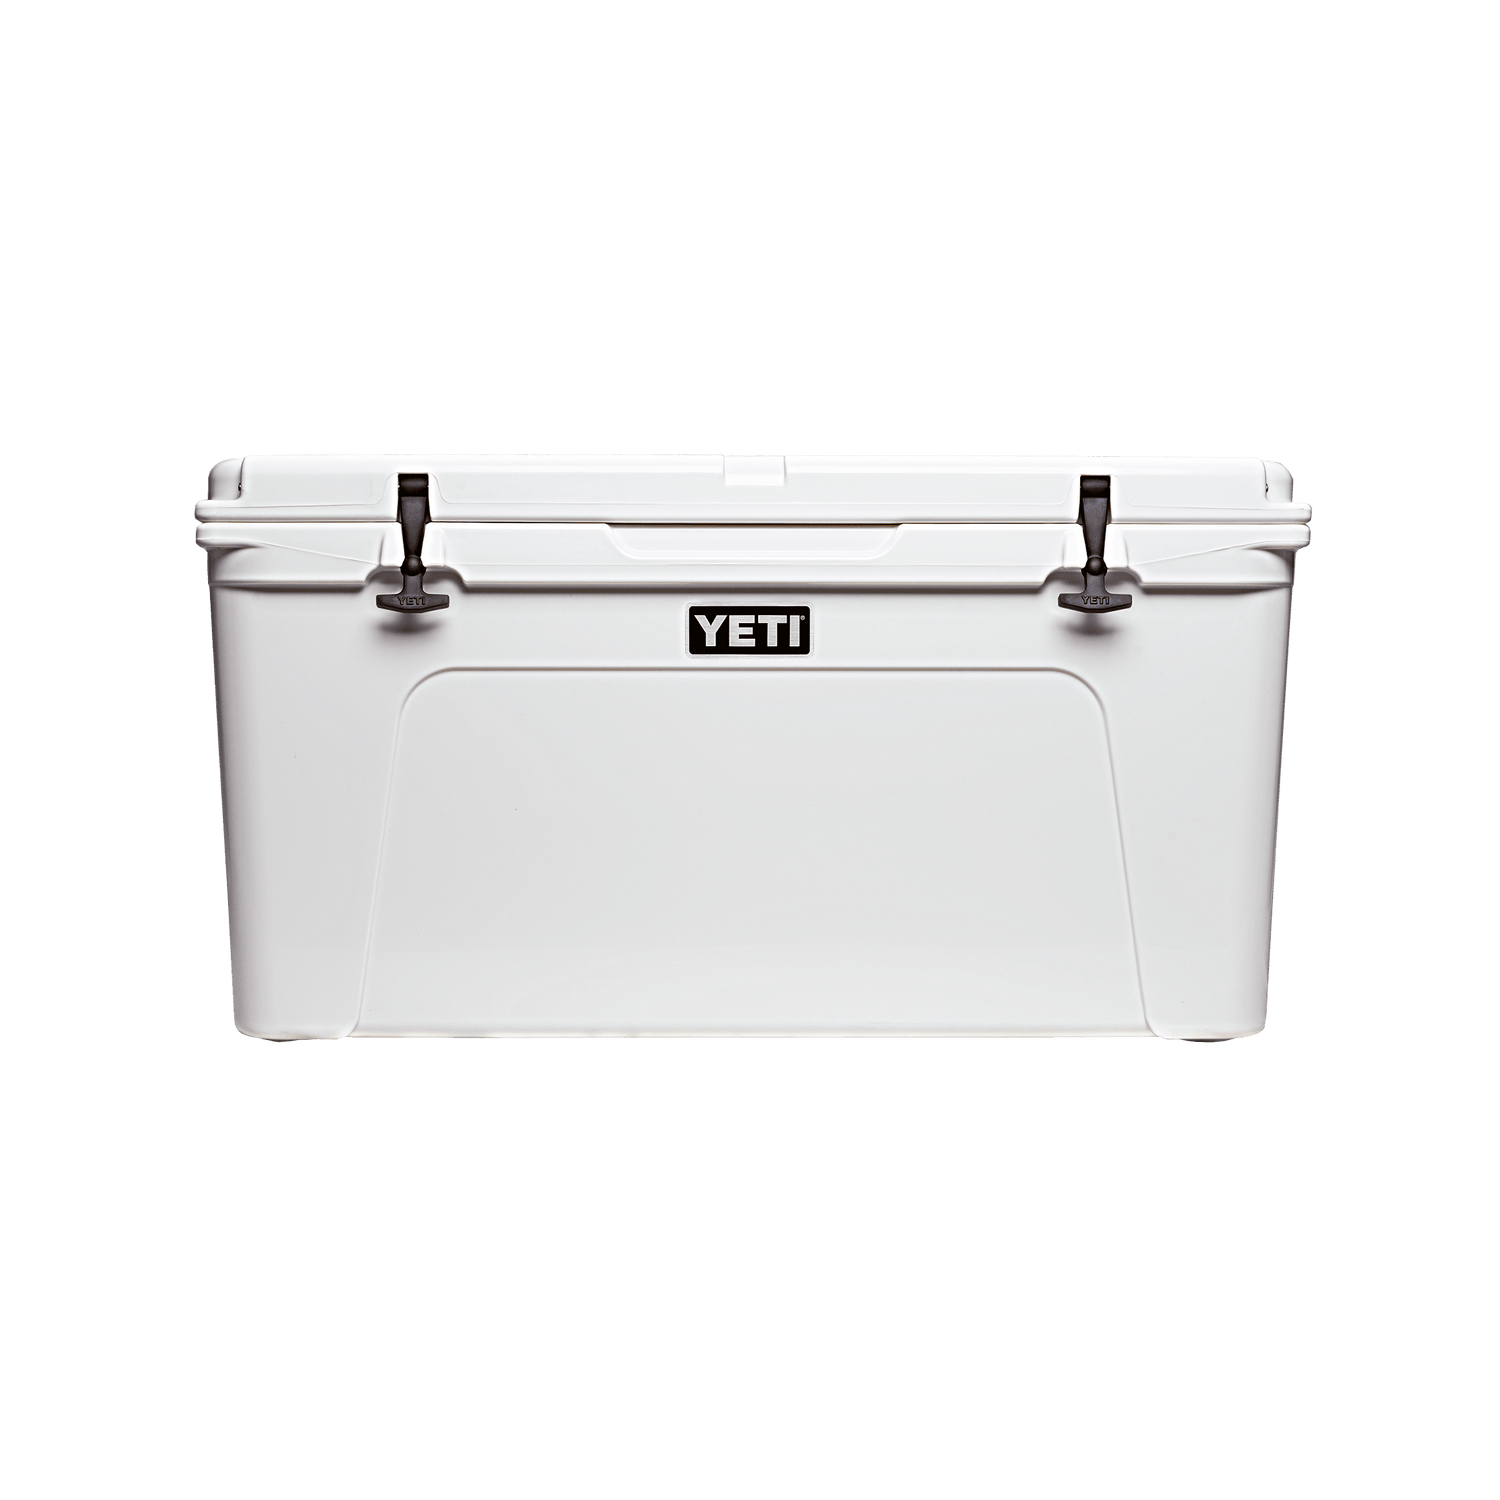 Yeti Tundra 45 Review & Five Day Ice Challenge Results, Do Yeti Coolers Go  On Sale? 